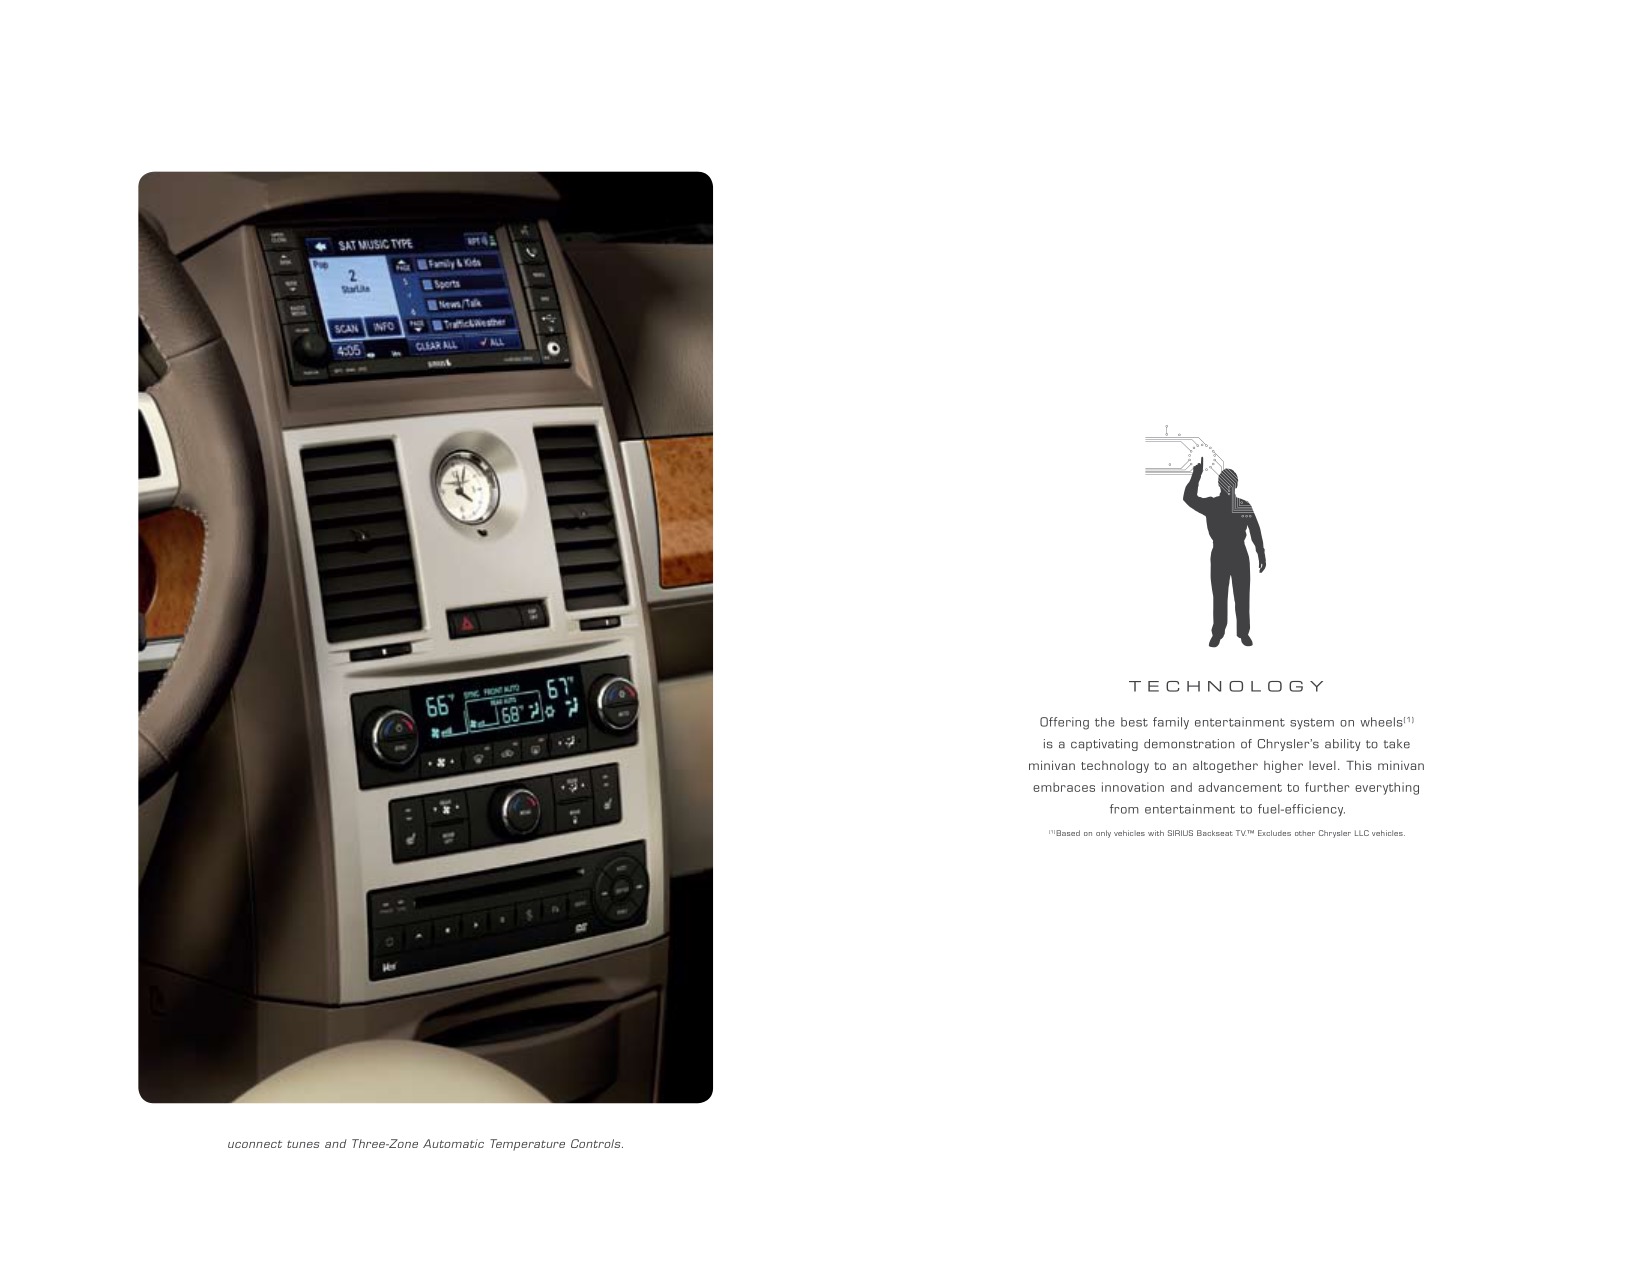 2009 Chrysler Town & Country Brochure Page 12